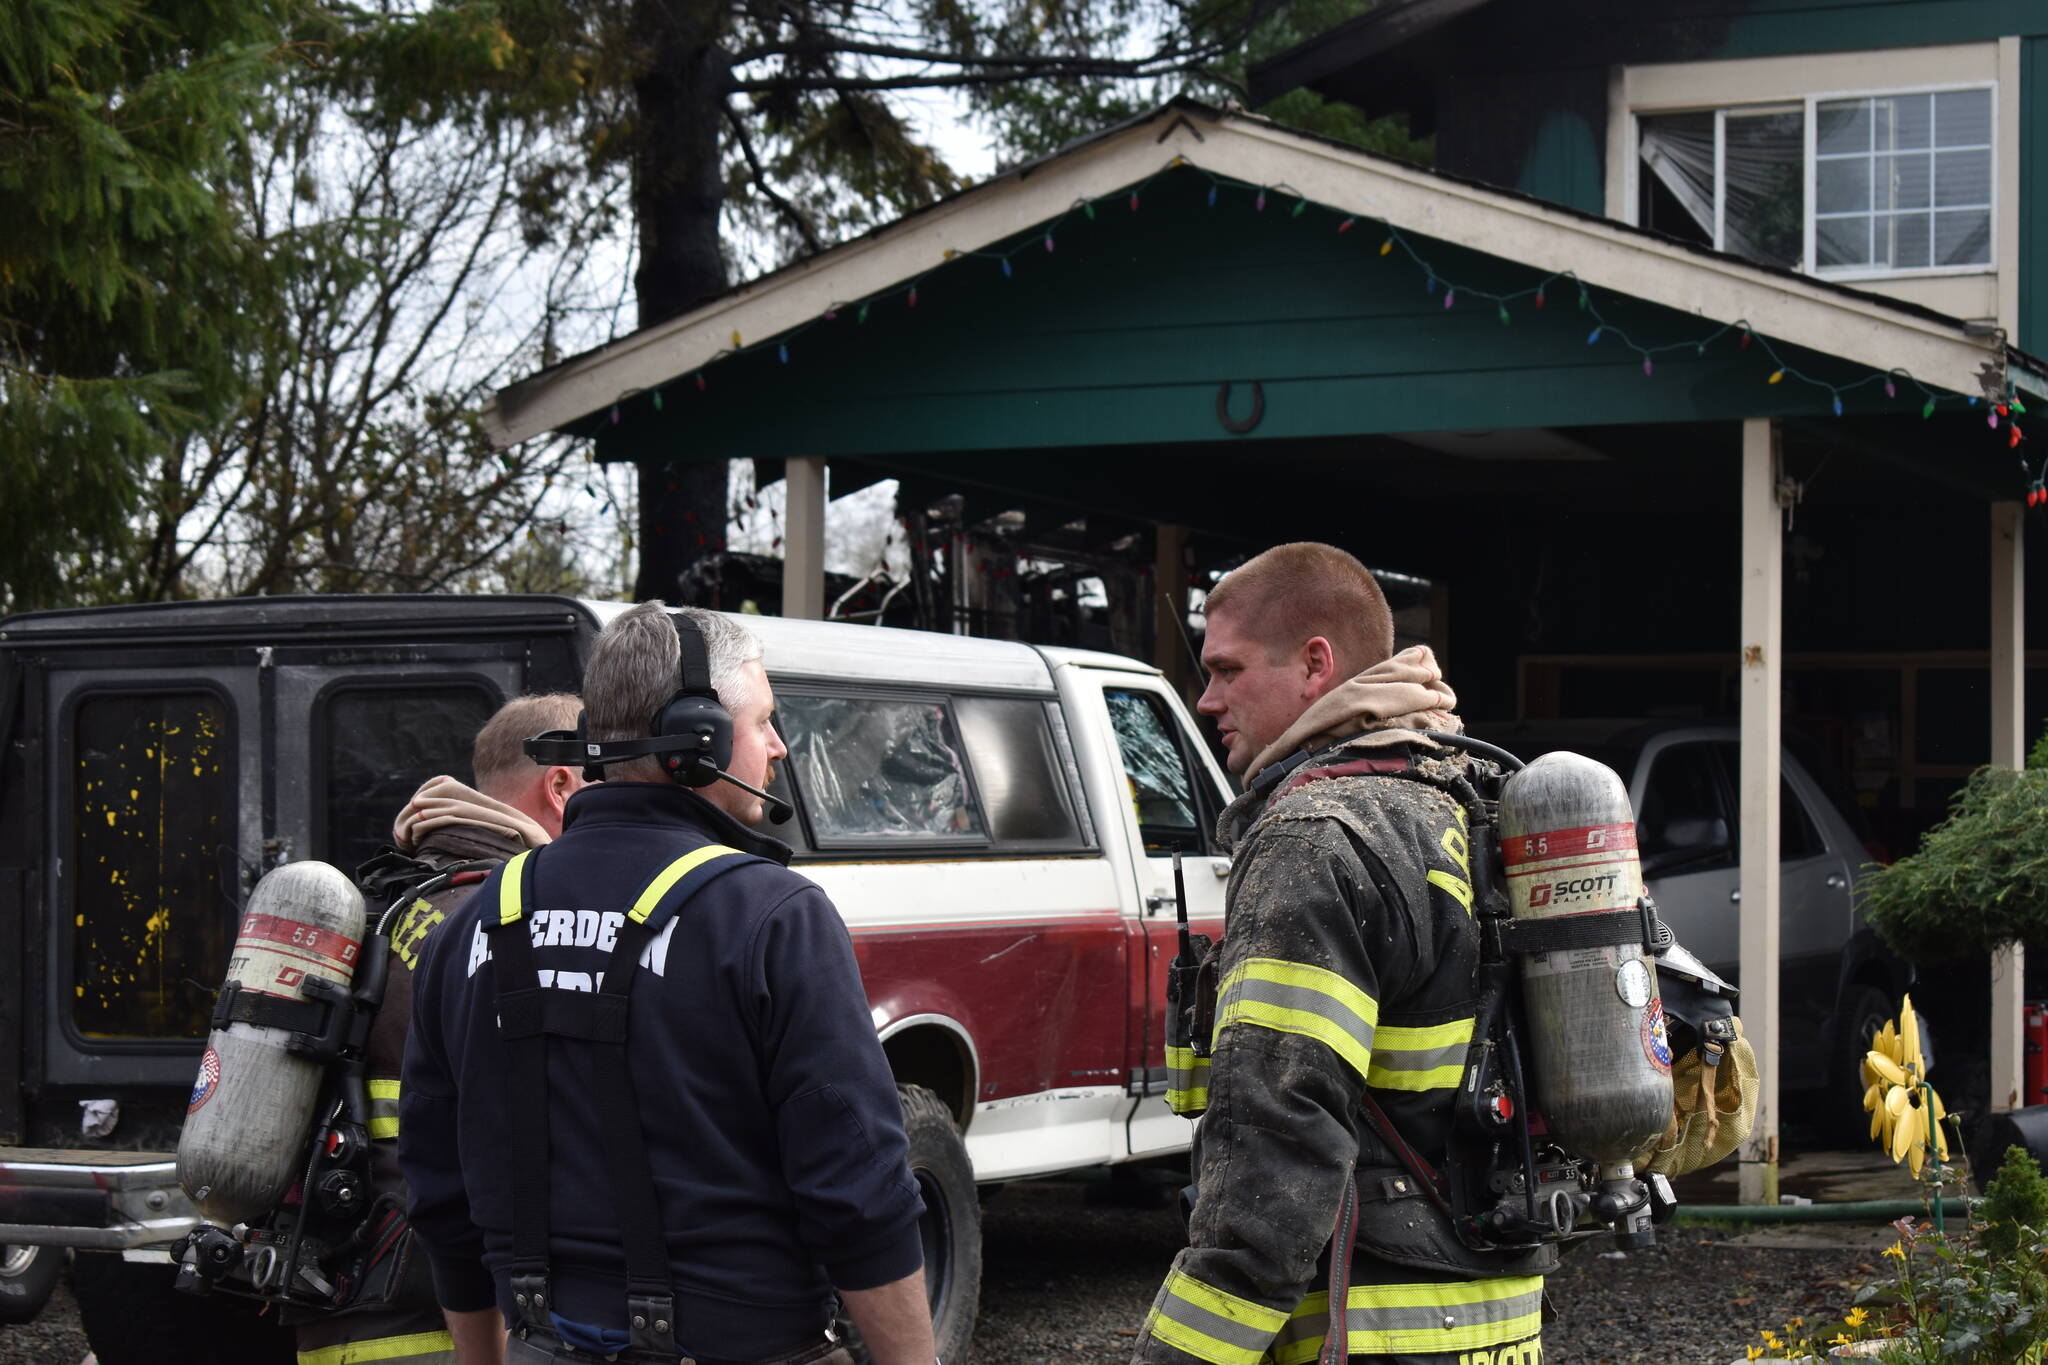 Firefighters attend the scene of a fire in South Aberdeen that began in an RV on Thursday, Nov. 10. (Clayton Franke / The Daily World)